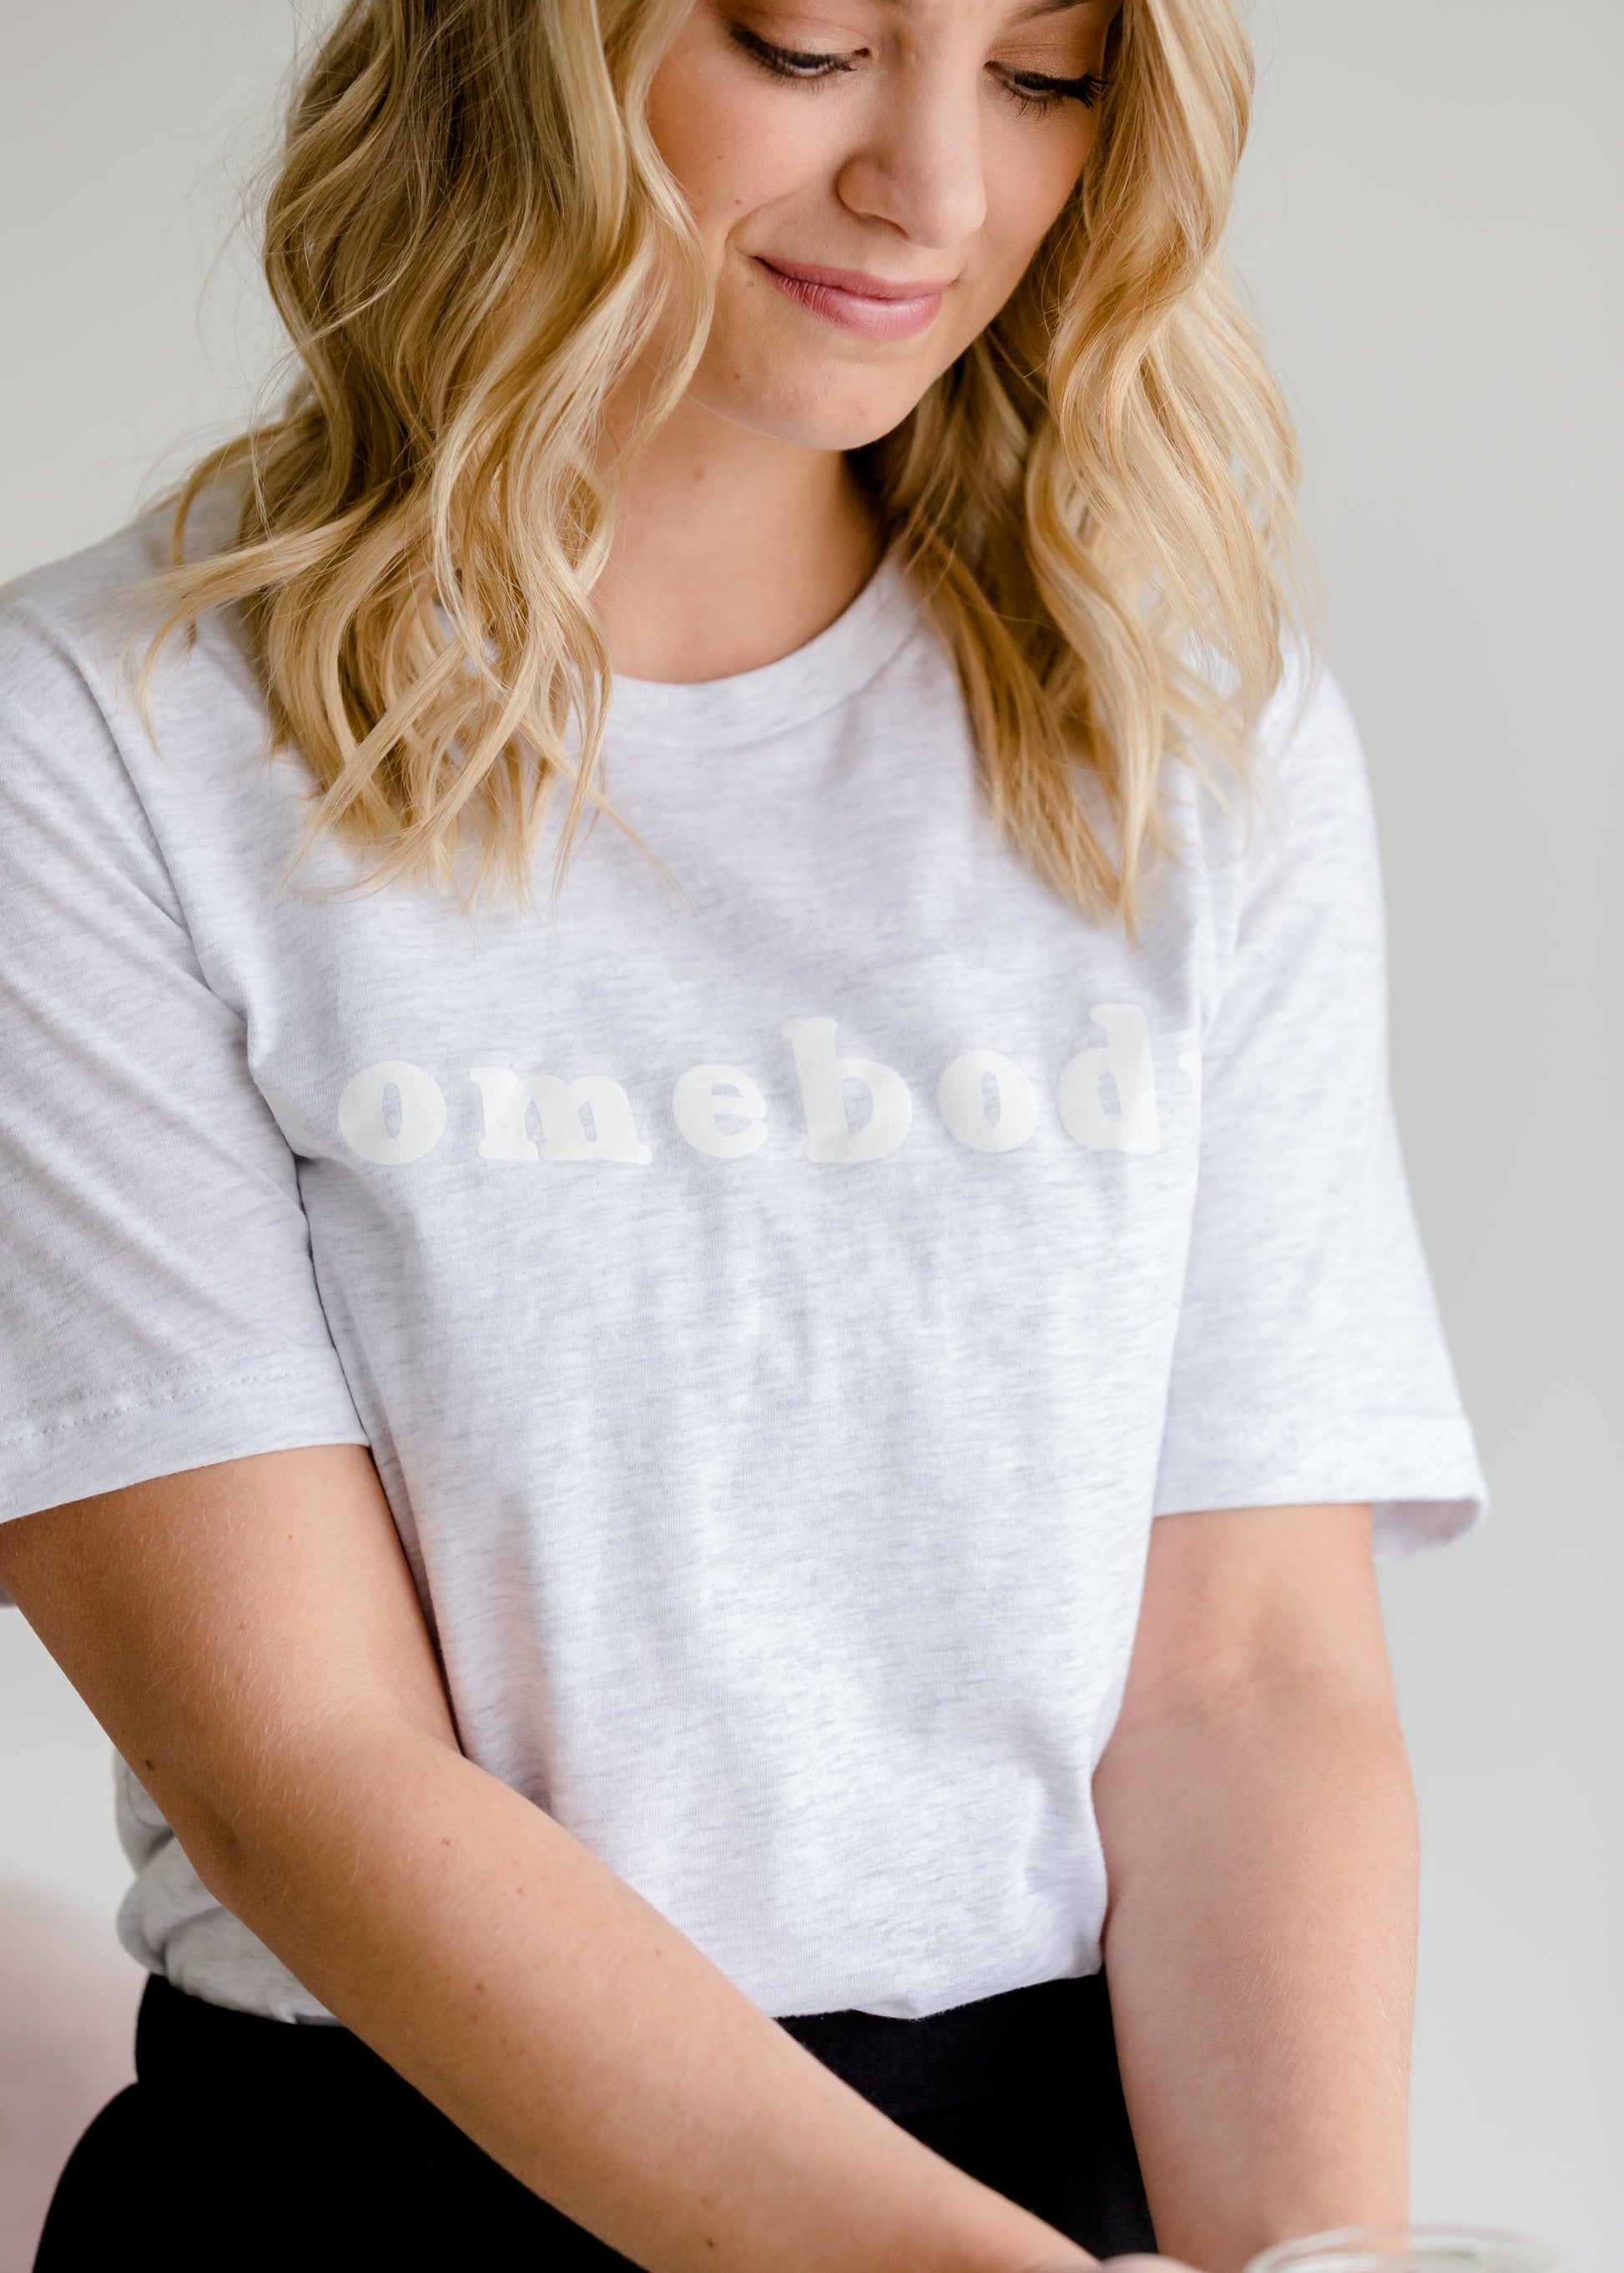 Gray Homebody Graphic Tee - FINAL SALE Tops